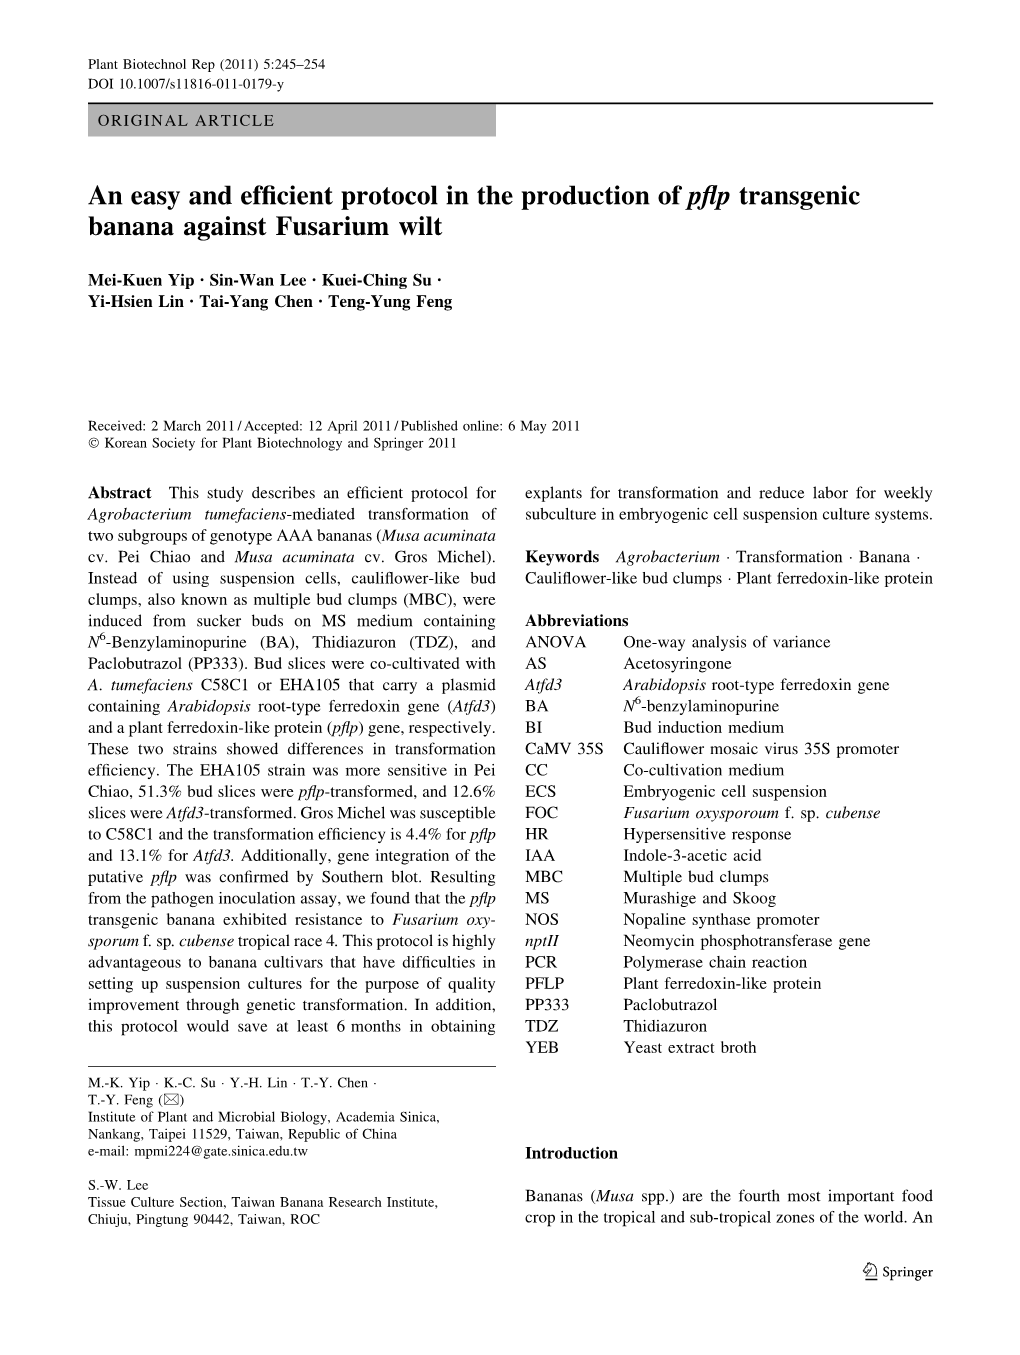 An Easy and Efficient Protocol in the Production of Pflp Transgenic